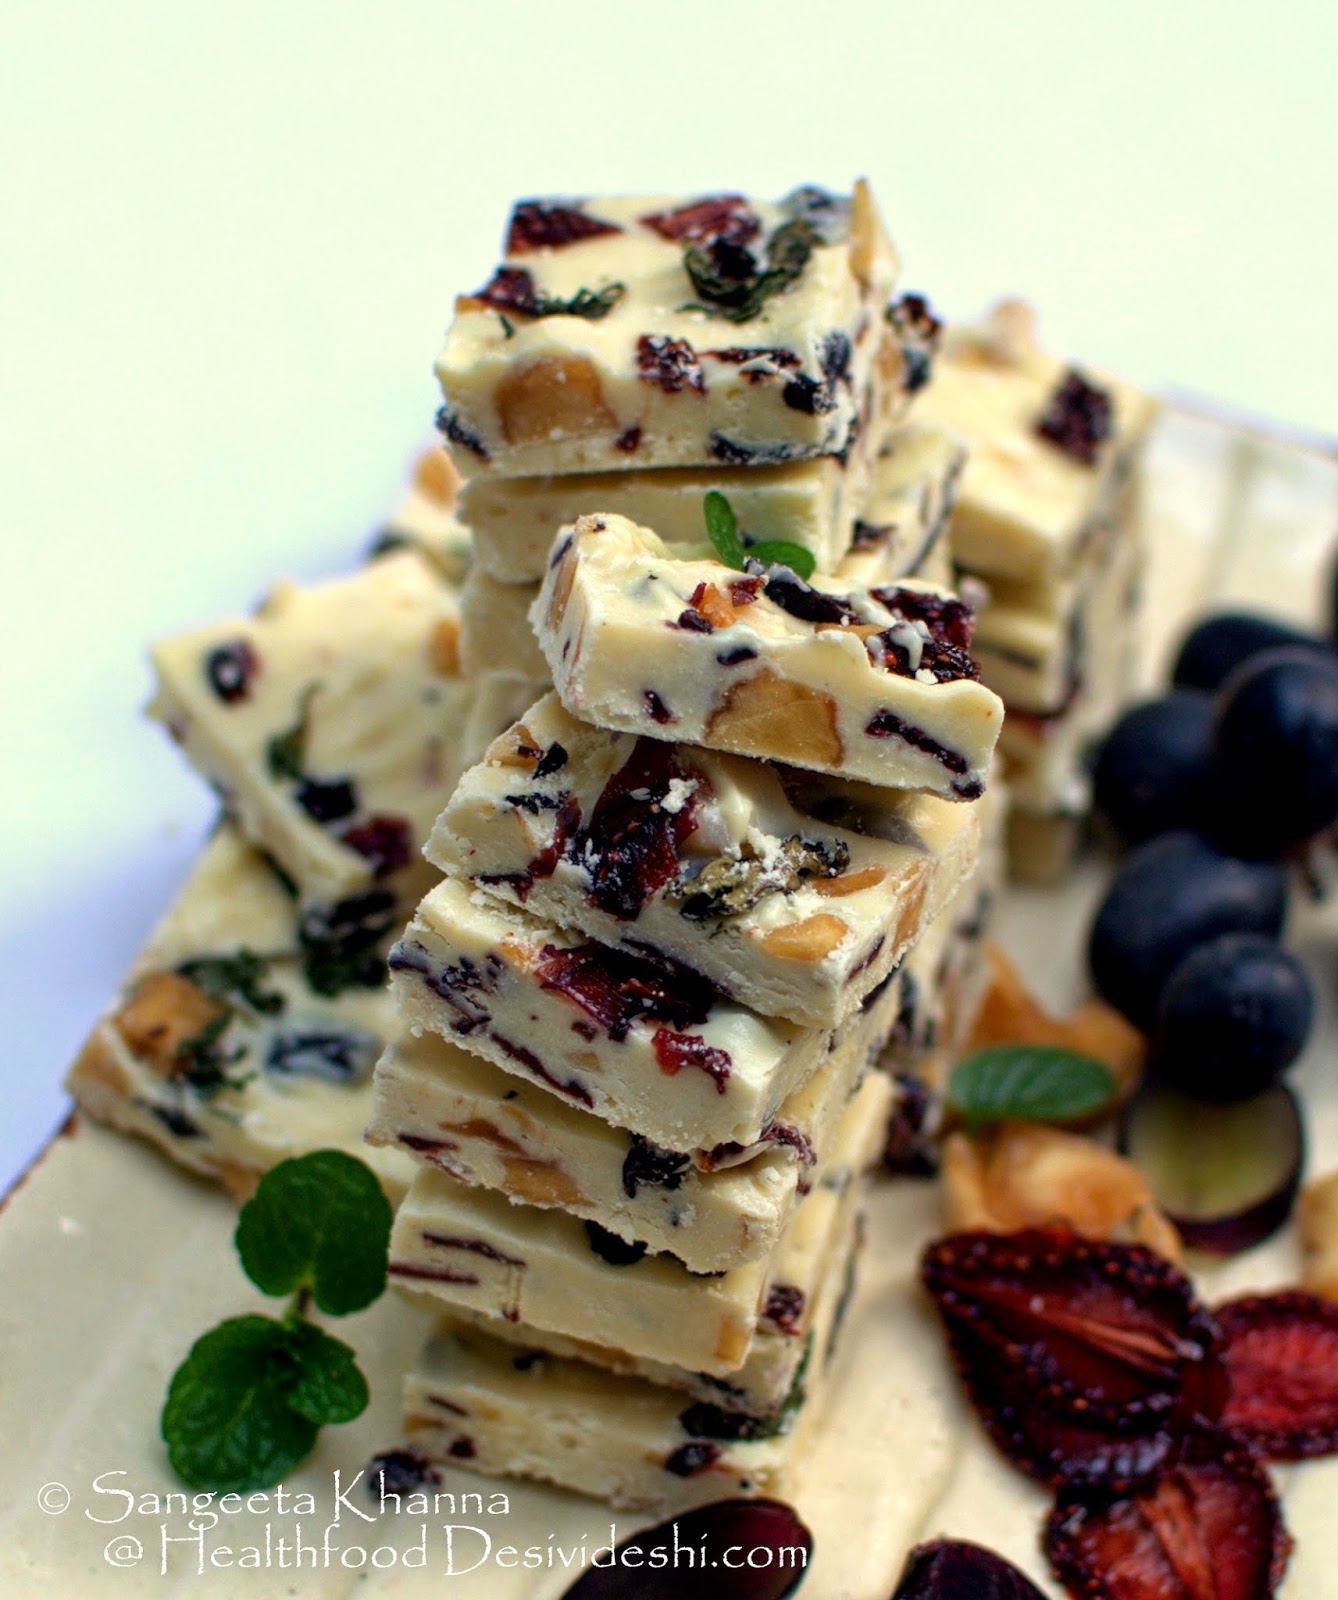 white chocolate bars with mixed sun dried fruits and hint of mint : perfect gifting ideas 